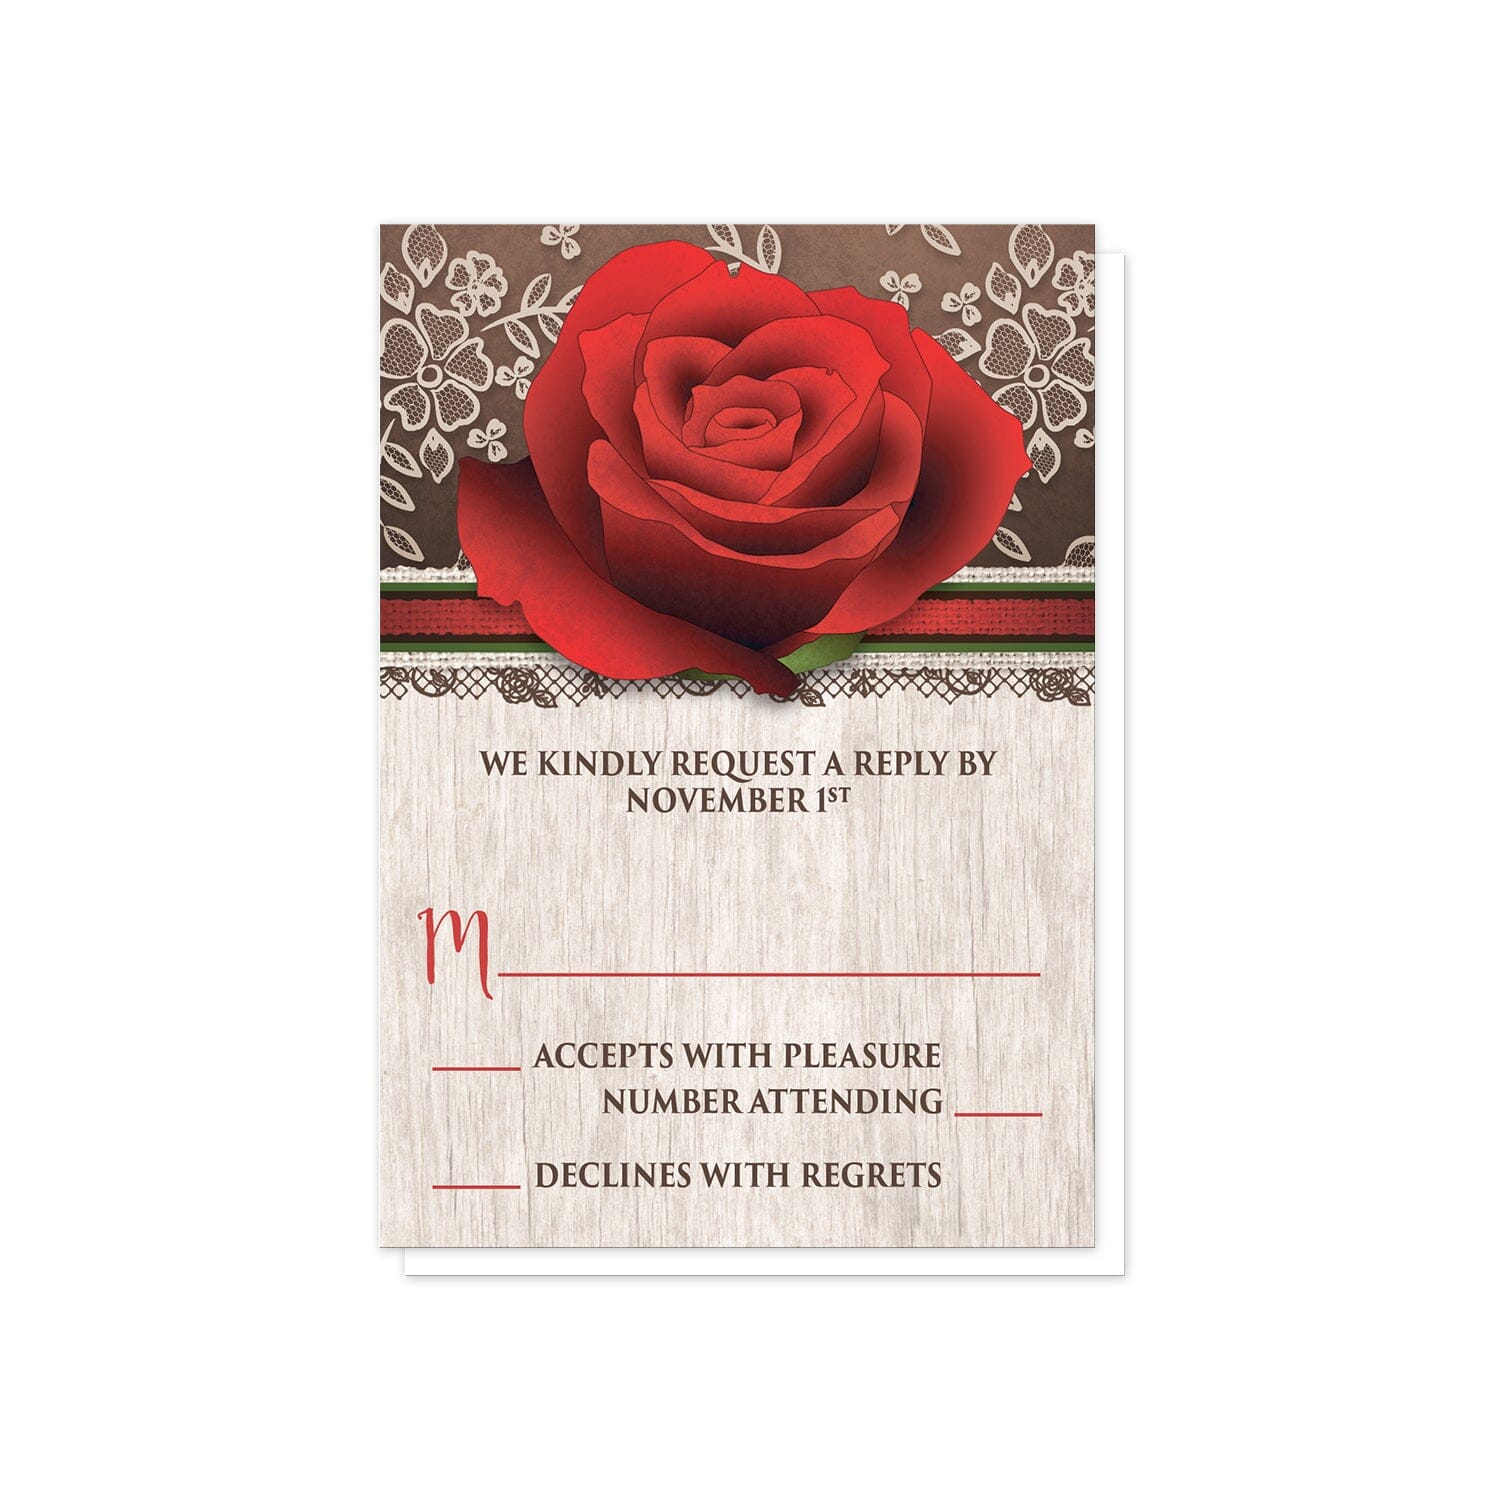 Rustic Wood Lace Red Rose RSVP Cards at Artistically Invited. Beautiful rustic wood lace red rose wedding invitations with a lovely large red rose illustration over a rich brown background with a cream lace design at the top of the invitations. Your personalized RSVP date details are custom printed in red and brown over a light wood pattern background below the red rose.